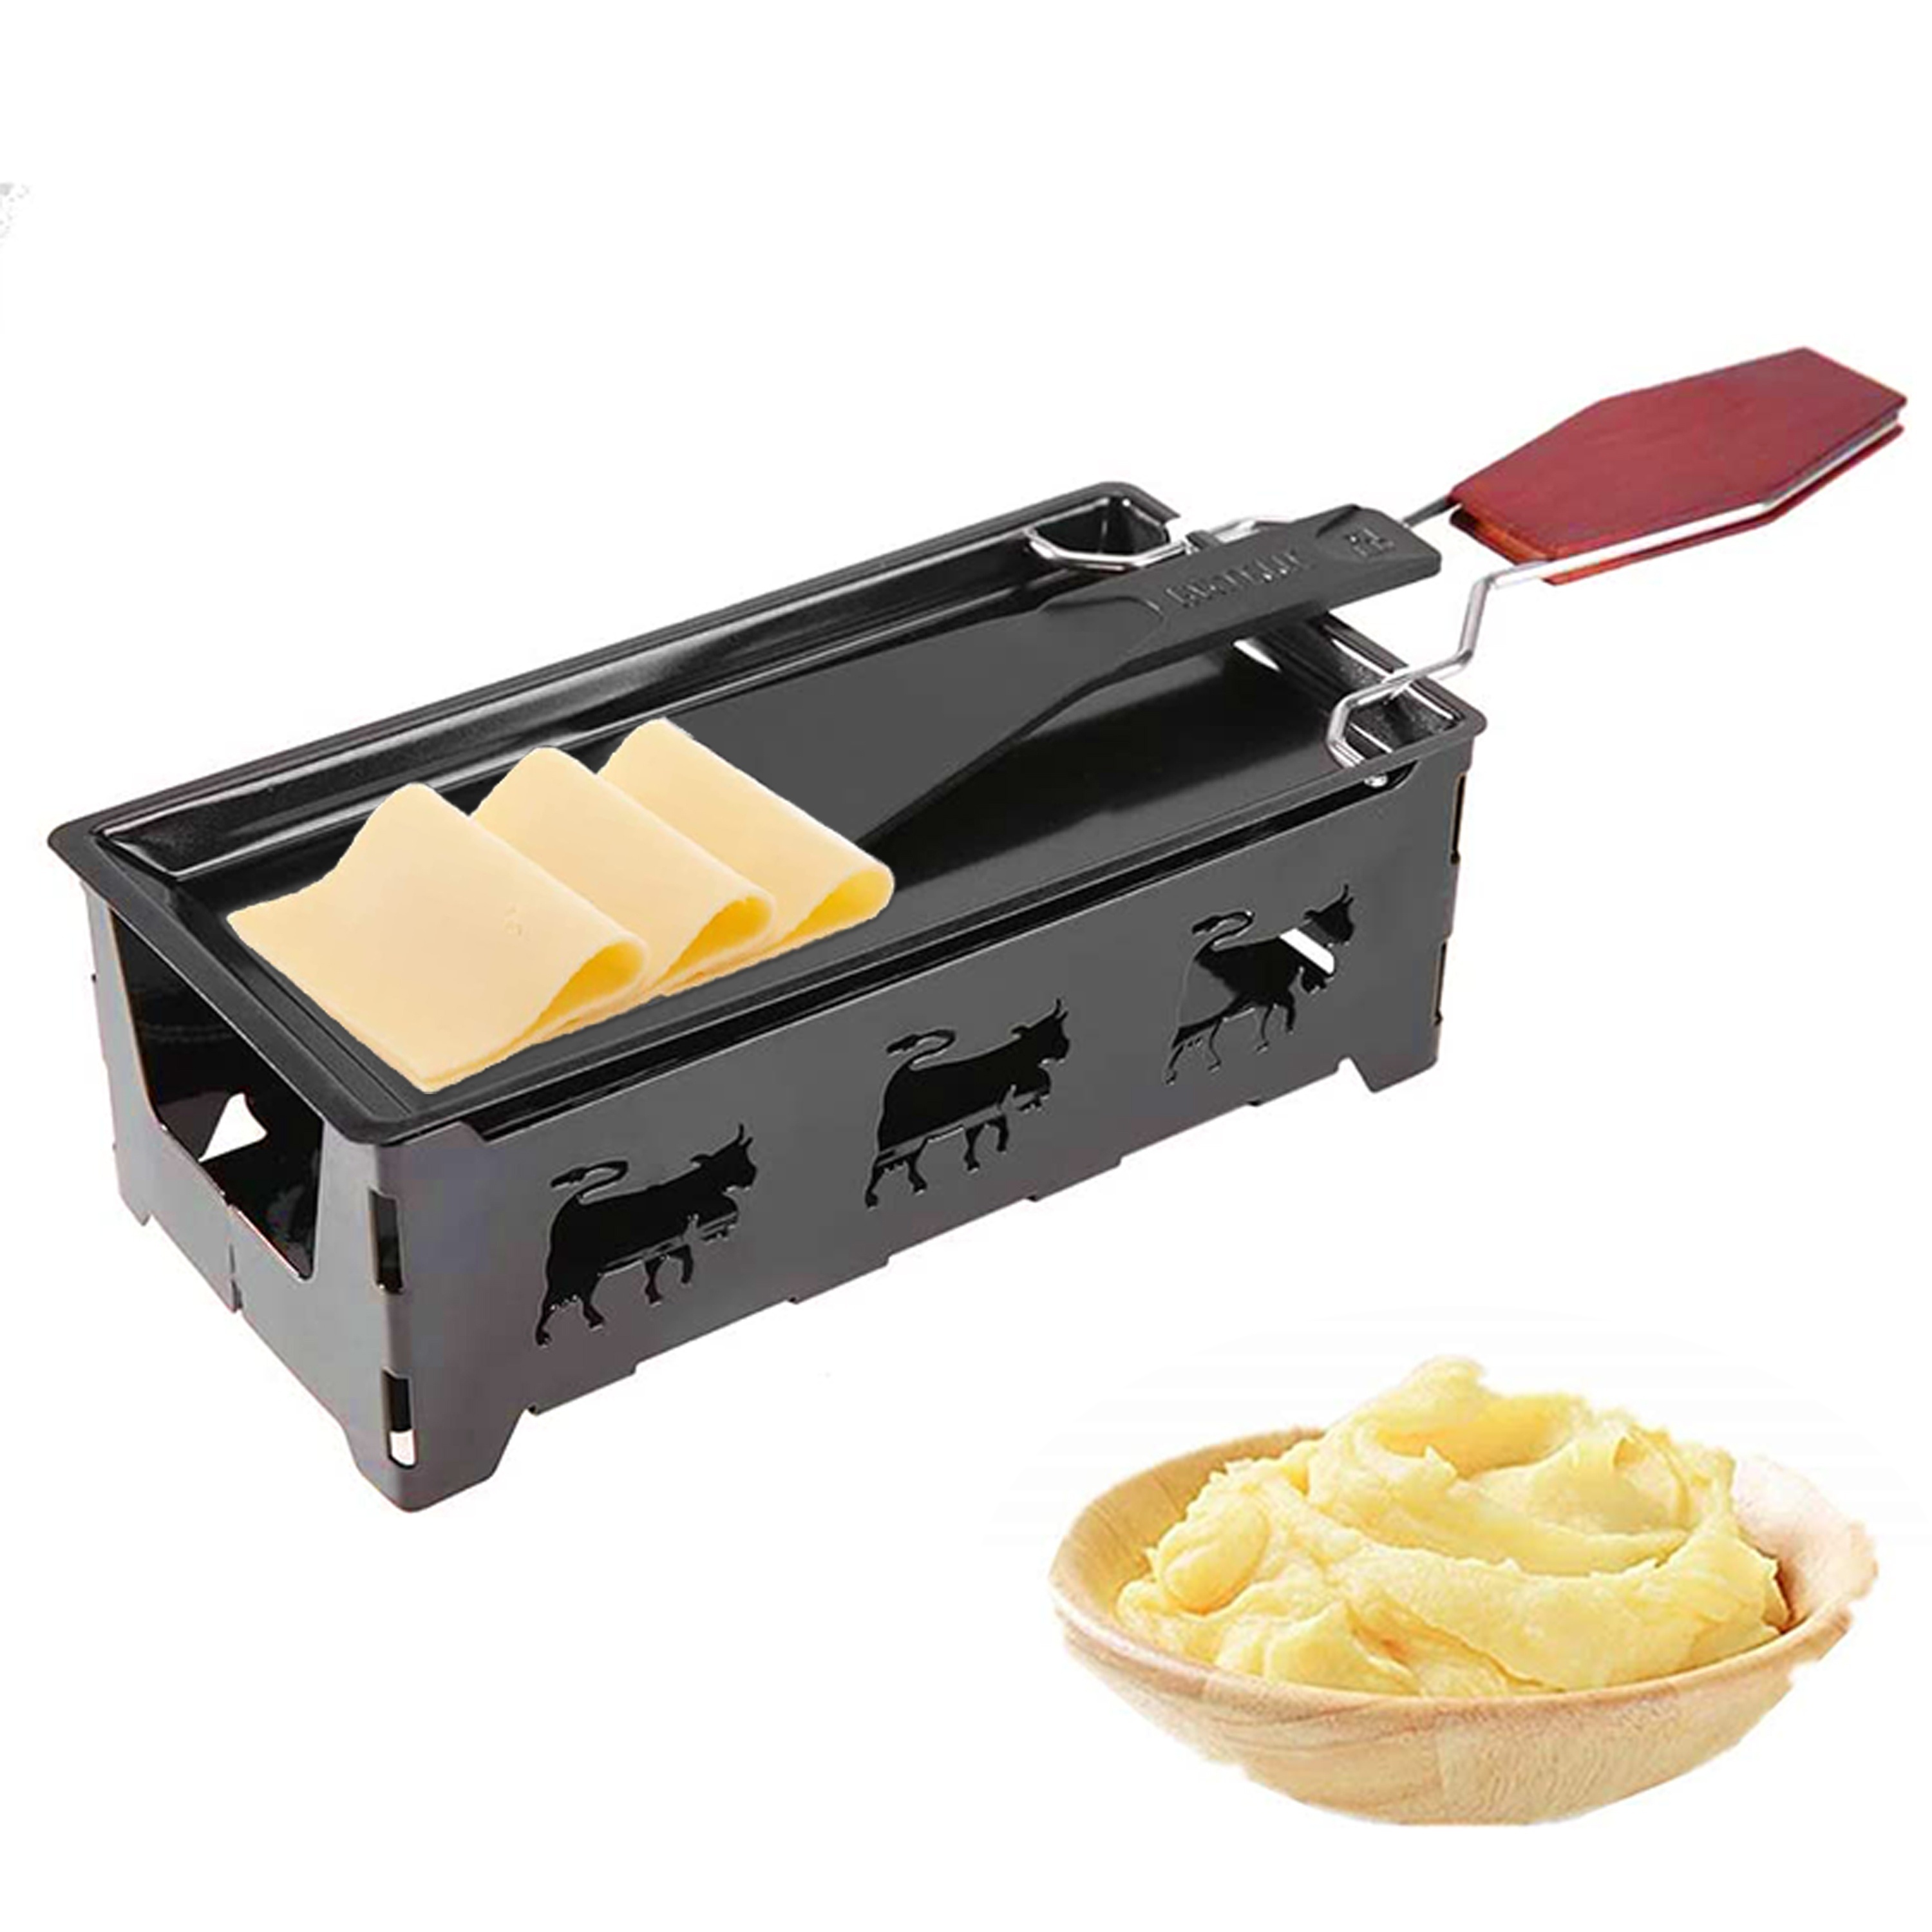  TUWEI Mini Cheese Raclette Grill for Swiss Non Stick Tool  Handle Rectangular Black Plate Griddle Mahogany Iron Miniature Raclette  Grills : Home & Kitchen